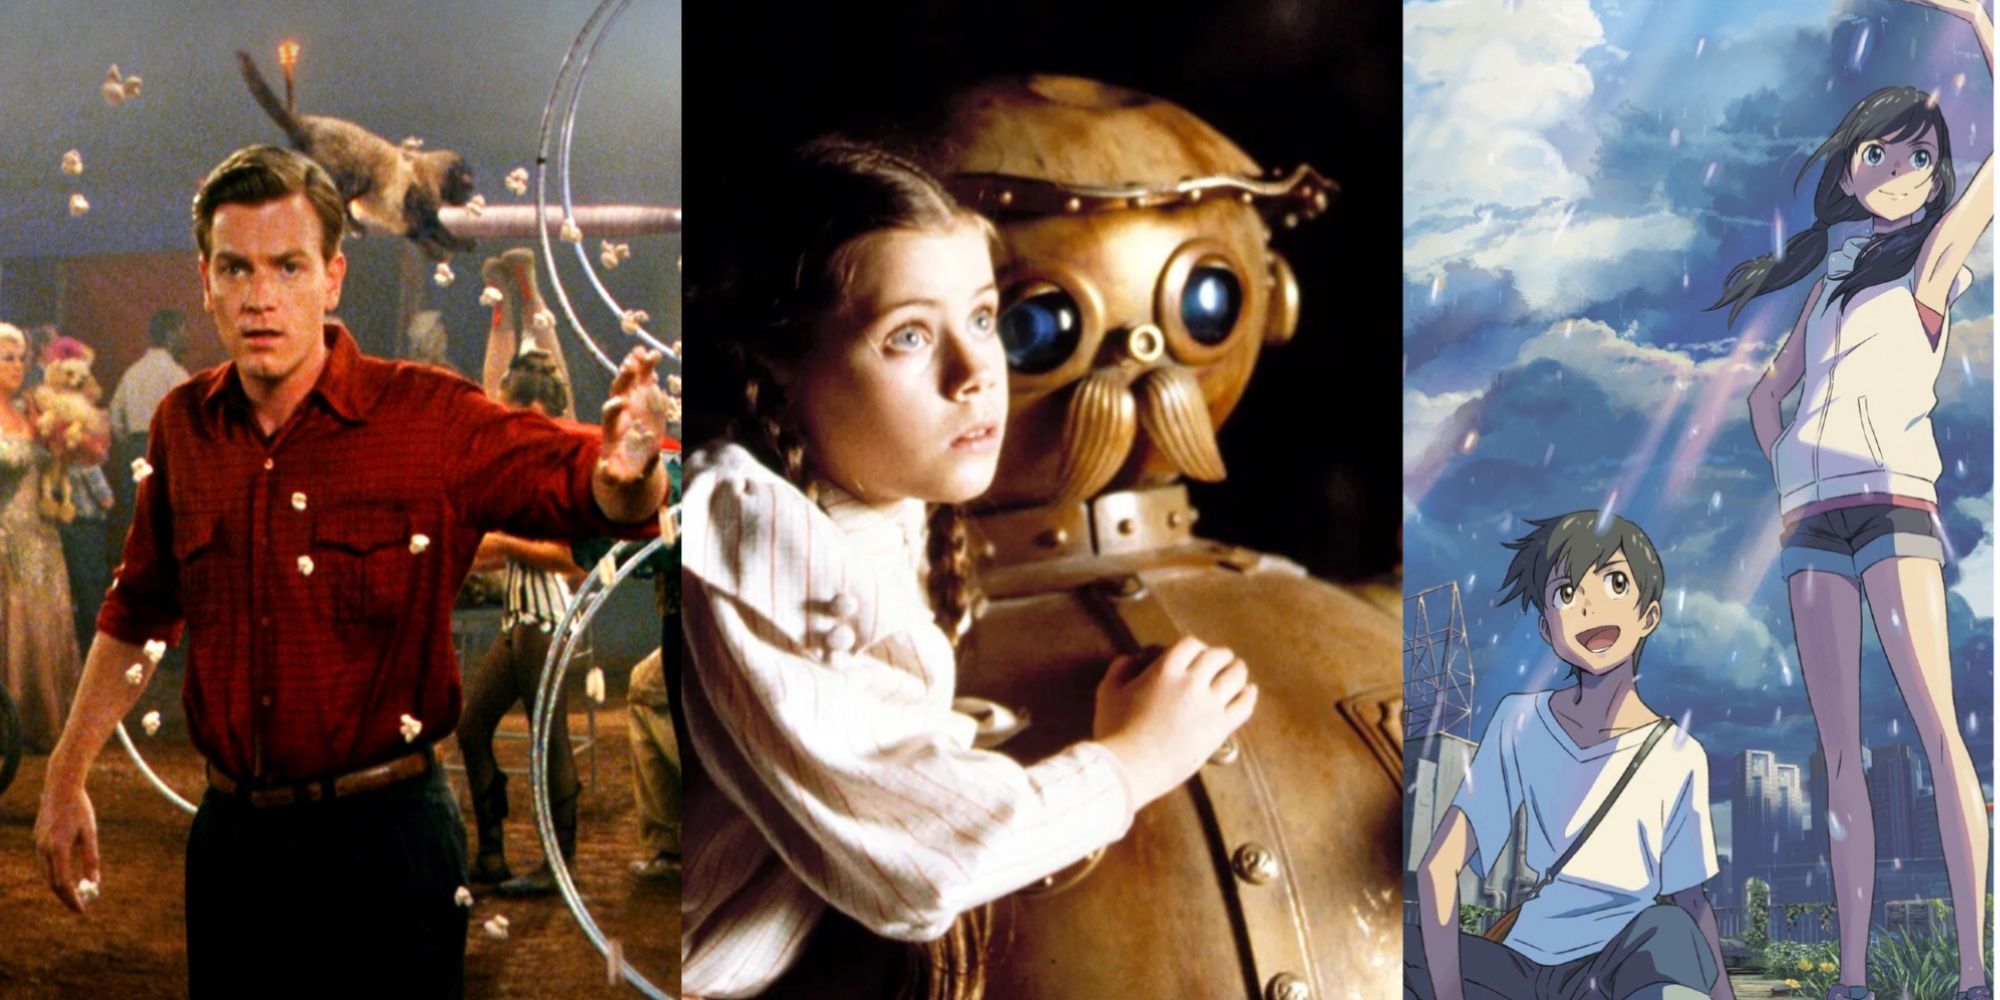 Big Fish, Return to Oz, and Weathering with You